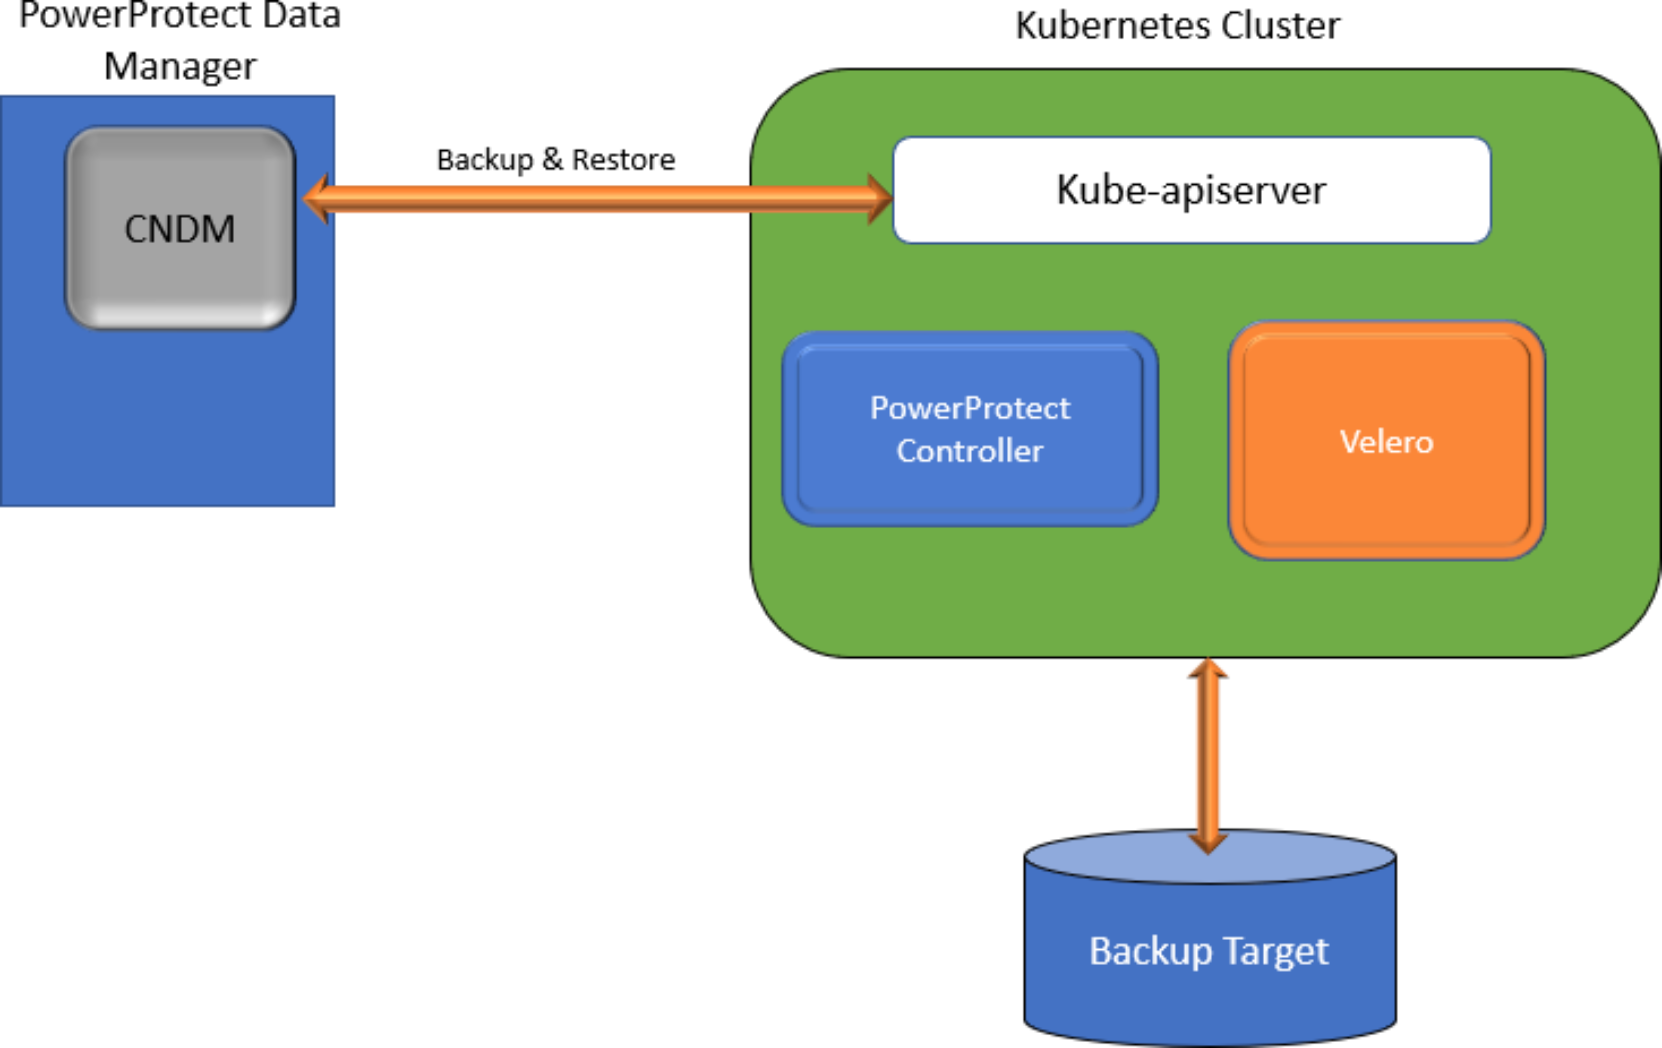 This image shows the protection of the Kubernetes cluster with PowerProtect Data Manager.